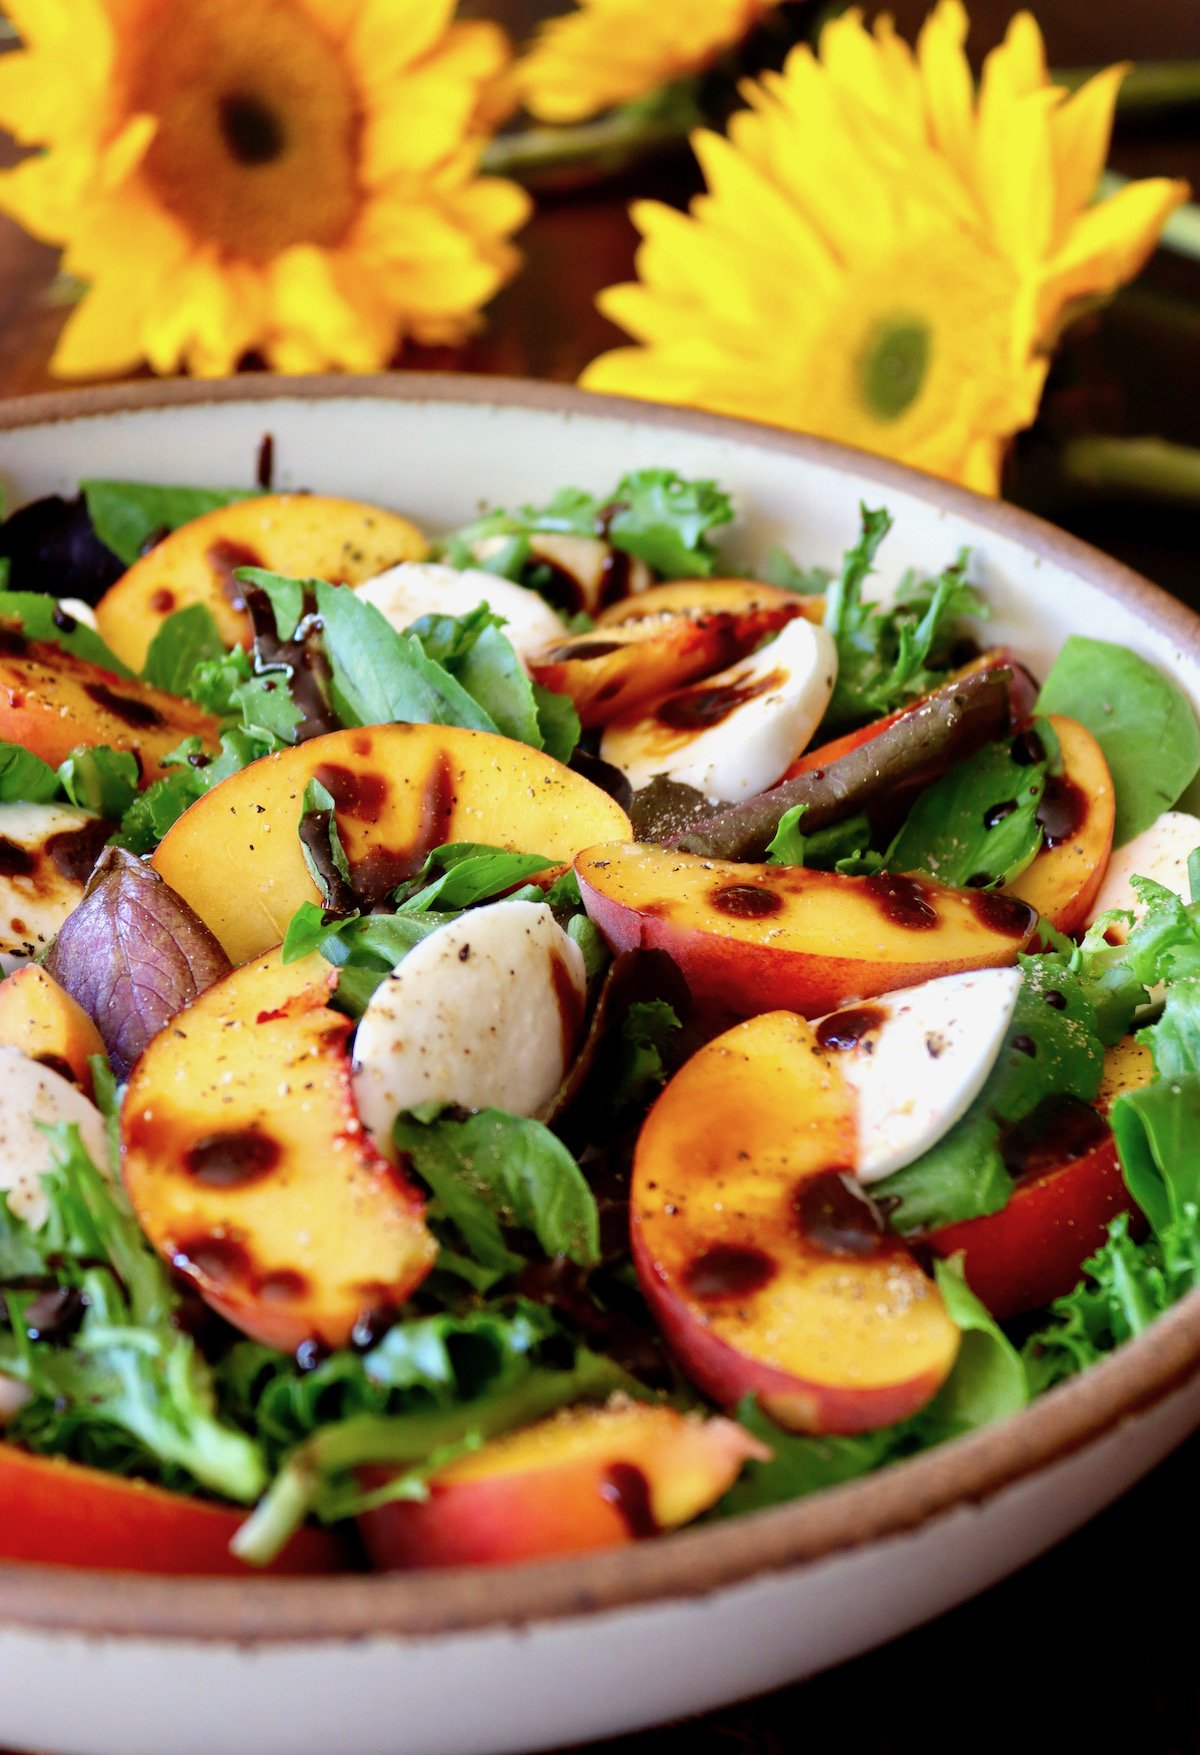 Cream-colored ceramic bowl filled to the top with Peach Caprese Salad with drops of balsamic glaze and fresh sun flowers behind it.